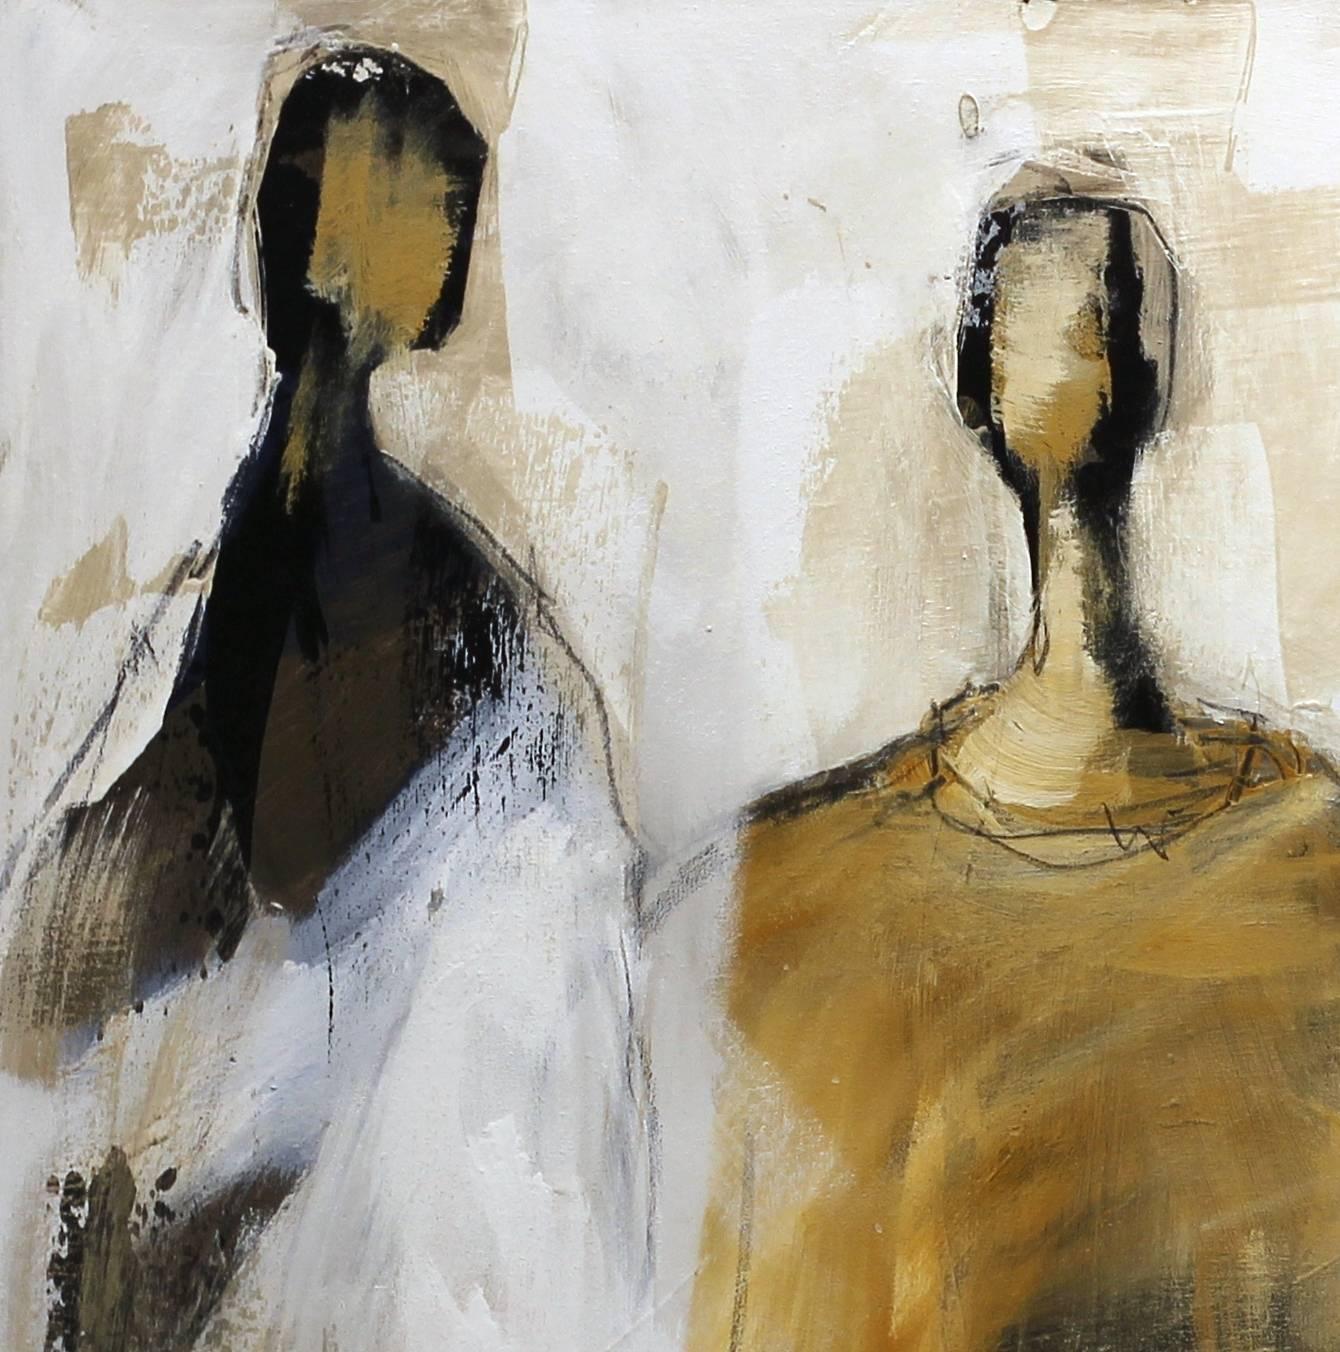 Swiss artist Edith Konrad paints figurative abstract compositions with mixed media on canvas. She layers her expression of her emotional response to the subjects with dynamic textures and subtle patterns in her artworks. The thick 3 dimensional